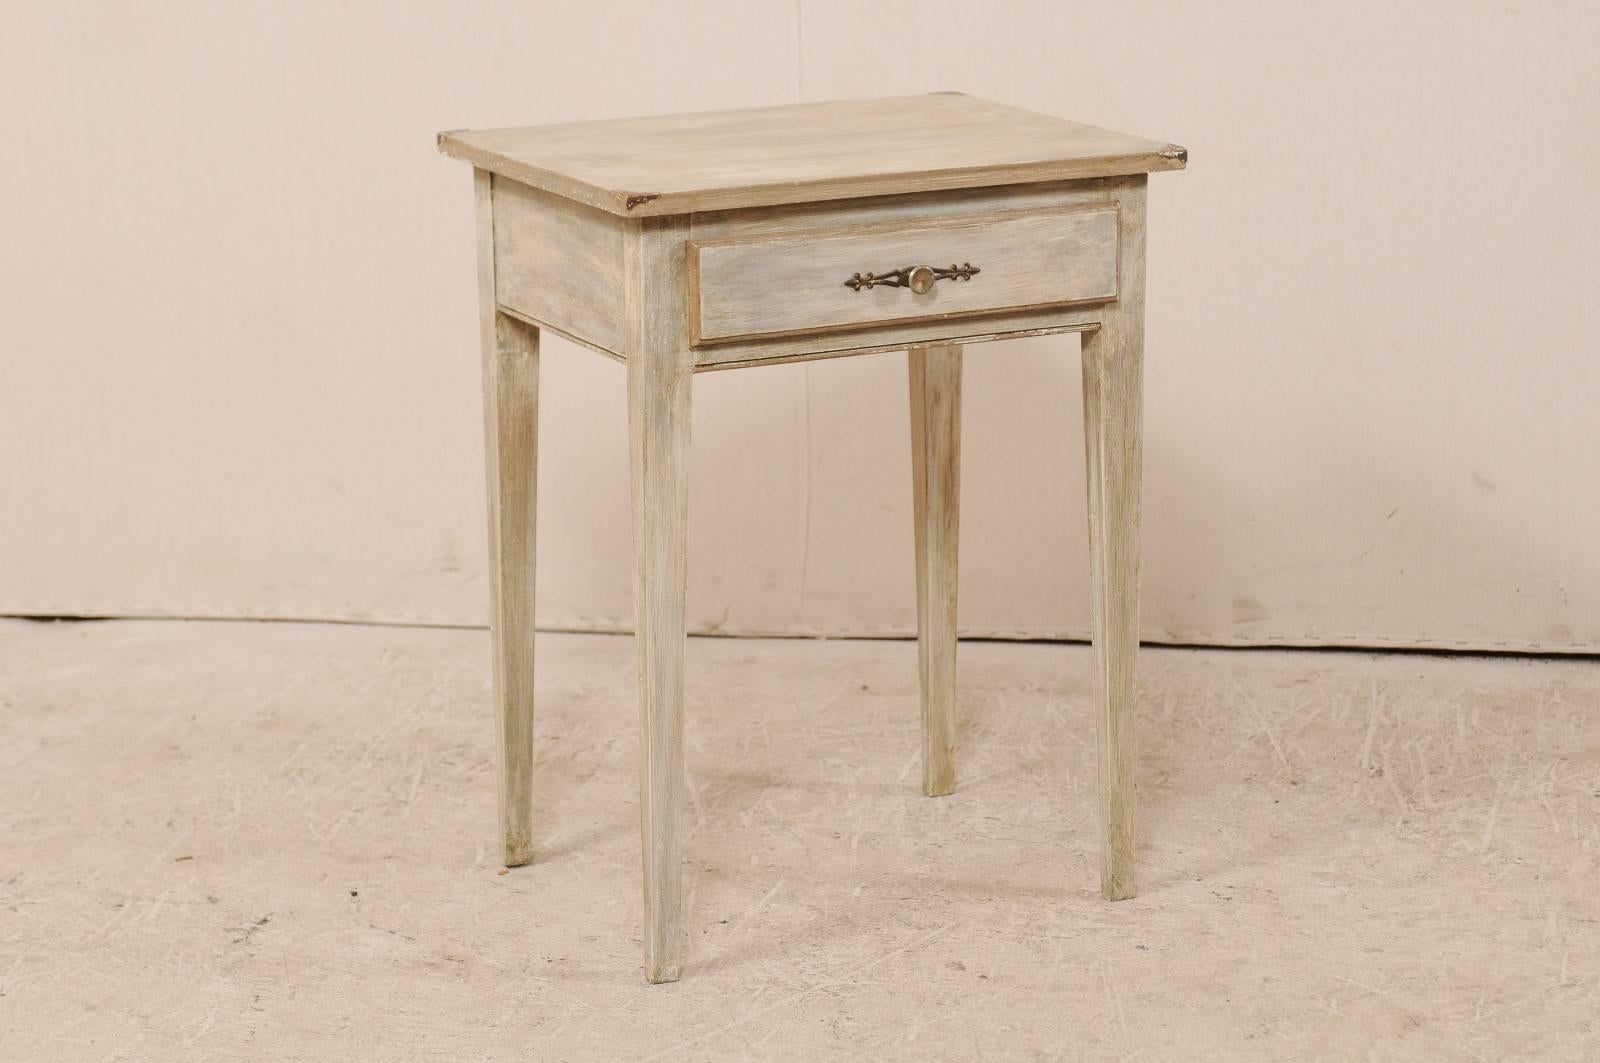 An American mid-20th century single drawer accent table. This American wood side table features a single drawer, rectangular top and squared legs. It is adorned with brass accents at each corner top, and brass knob with backplate on the drawer. This